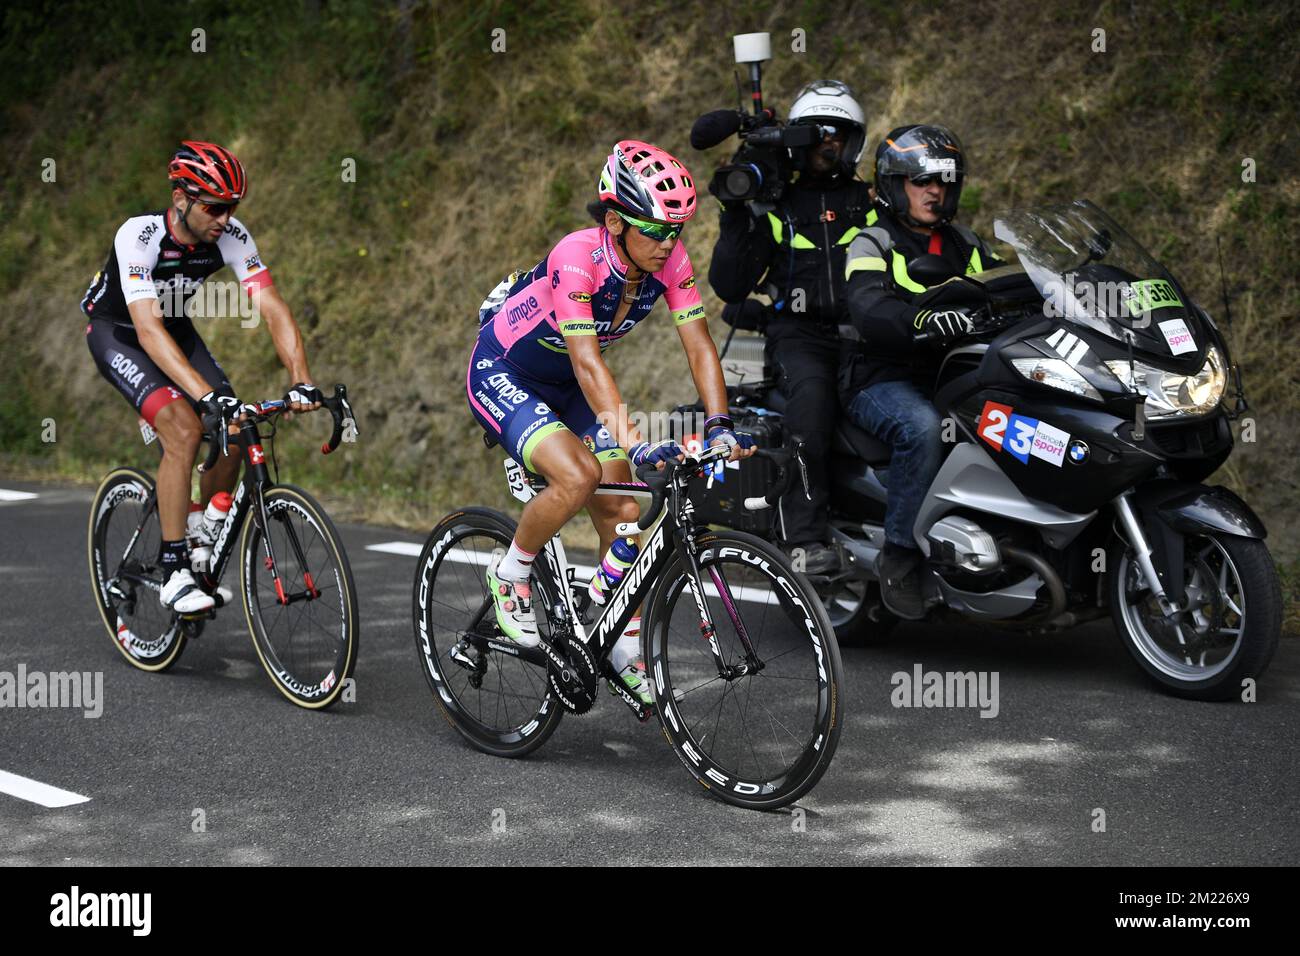 Czech Jan Barta of Bora-Argon 18 and Japanese Yukiya Arashiro of Lampre-Merida pictured in action during the sixth stage of the 103rd edition of the Tour de France cycling race, 190,5 km from Arpajon-sur-Cere to Montauban, on Thursday 07 July 2016, in France. BELGA PHOTO YORICK JANSENS Stock Photo